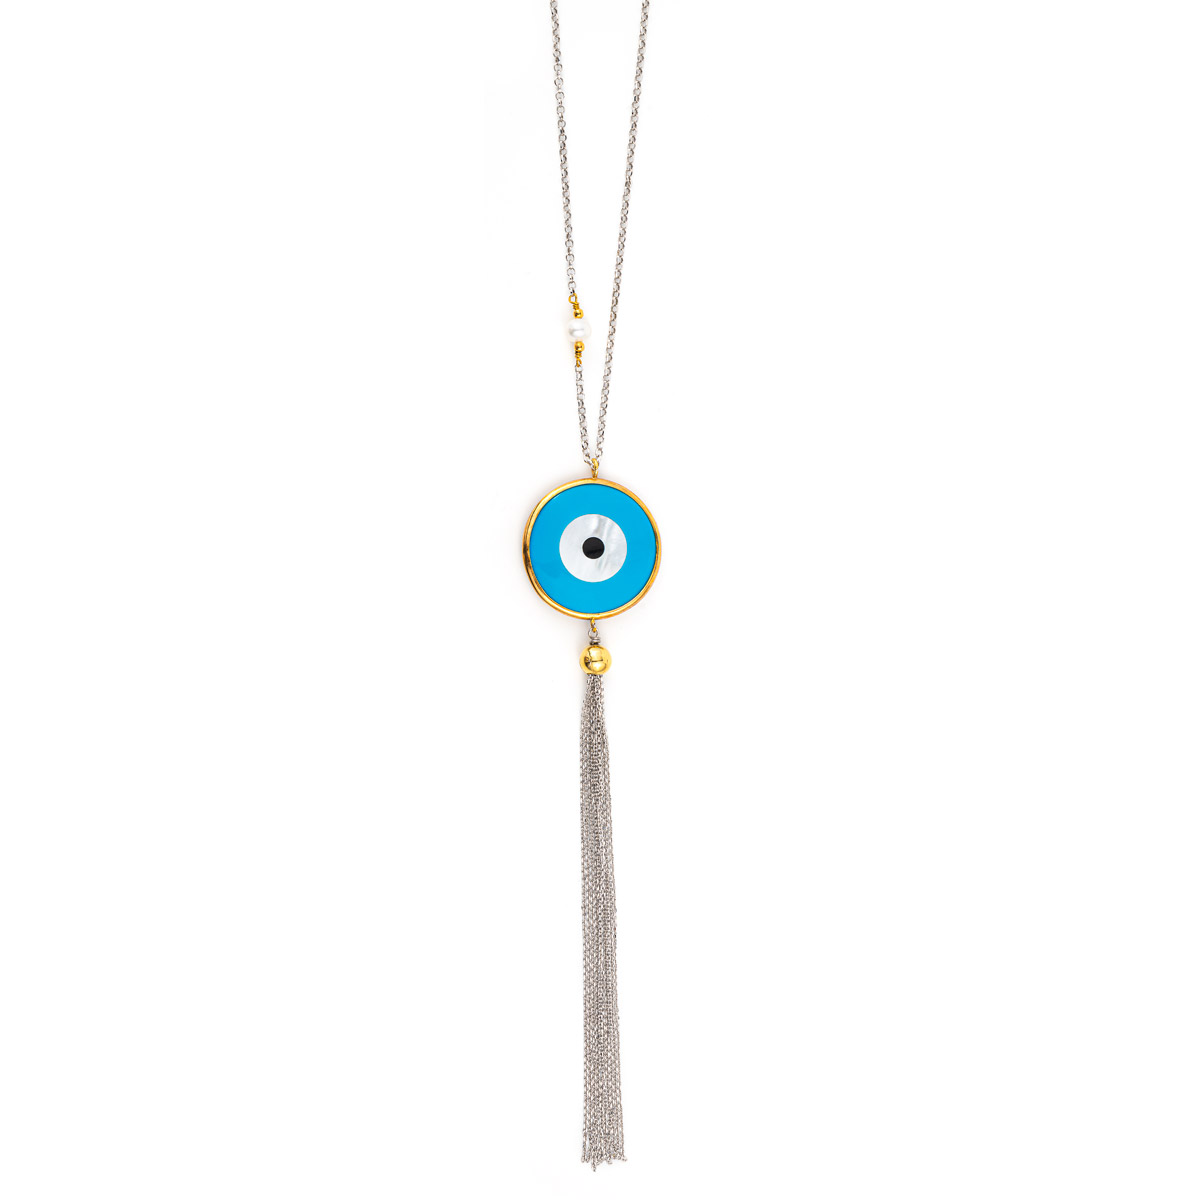 Mother of Pearl Eye Long Necklace - Silver and Gold Plated